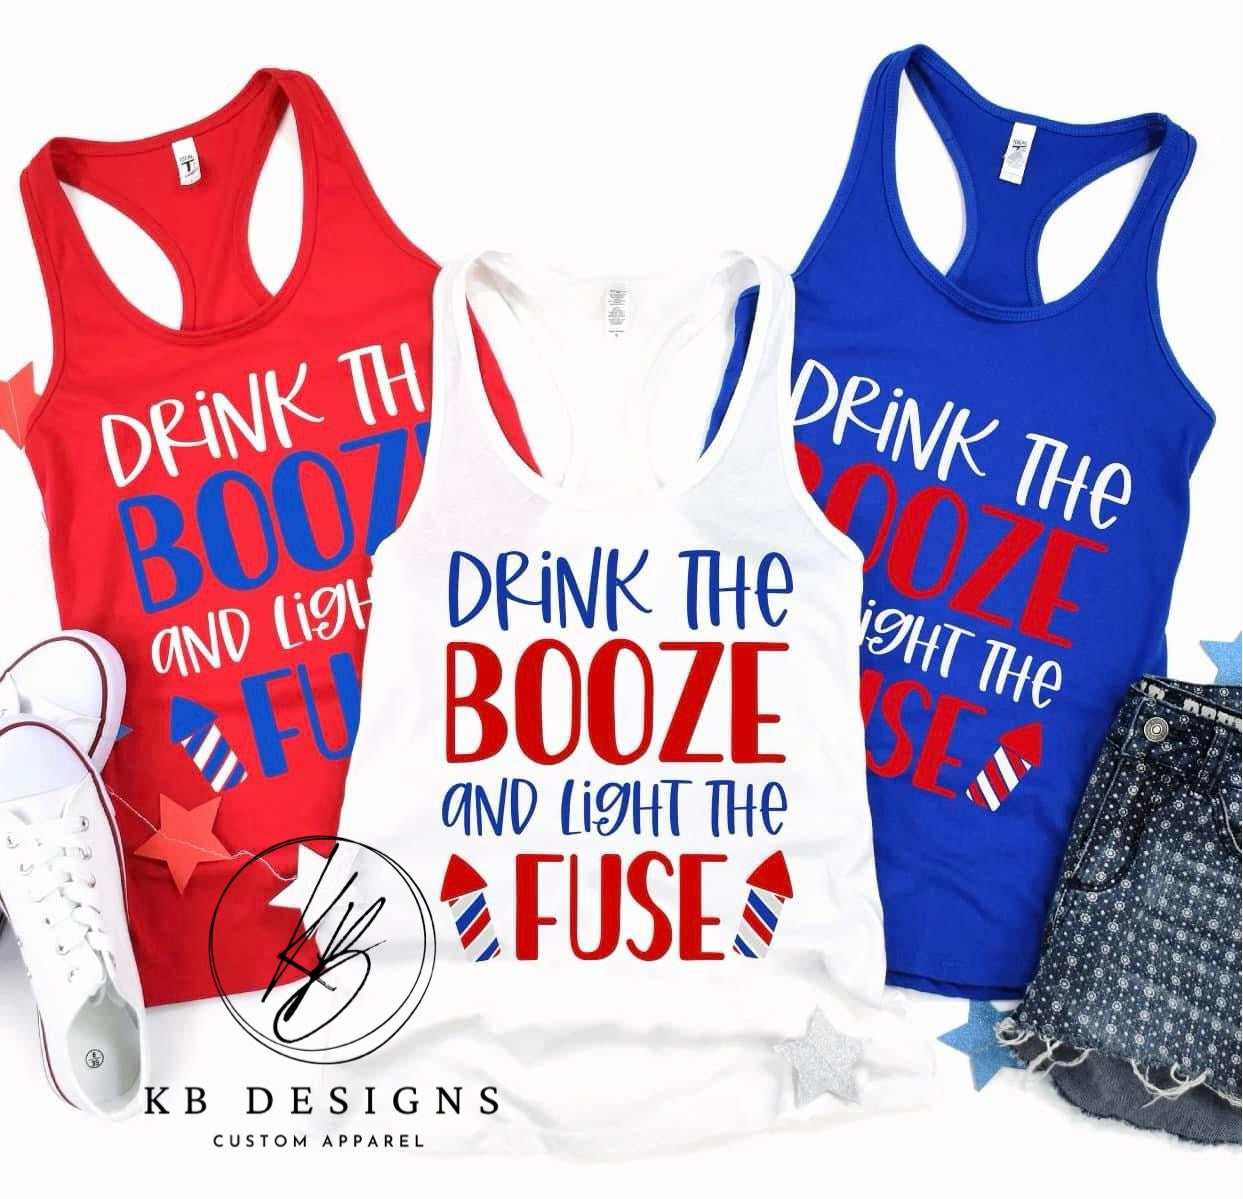 Drink the Booze and Light the Fuse Tee